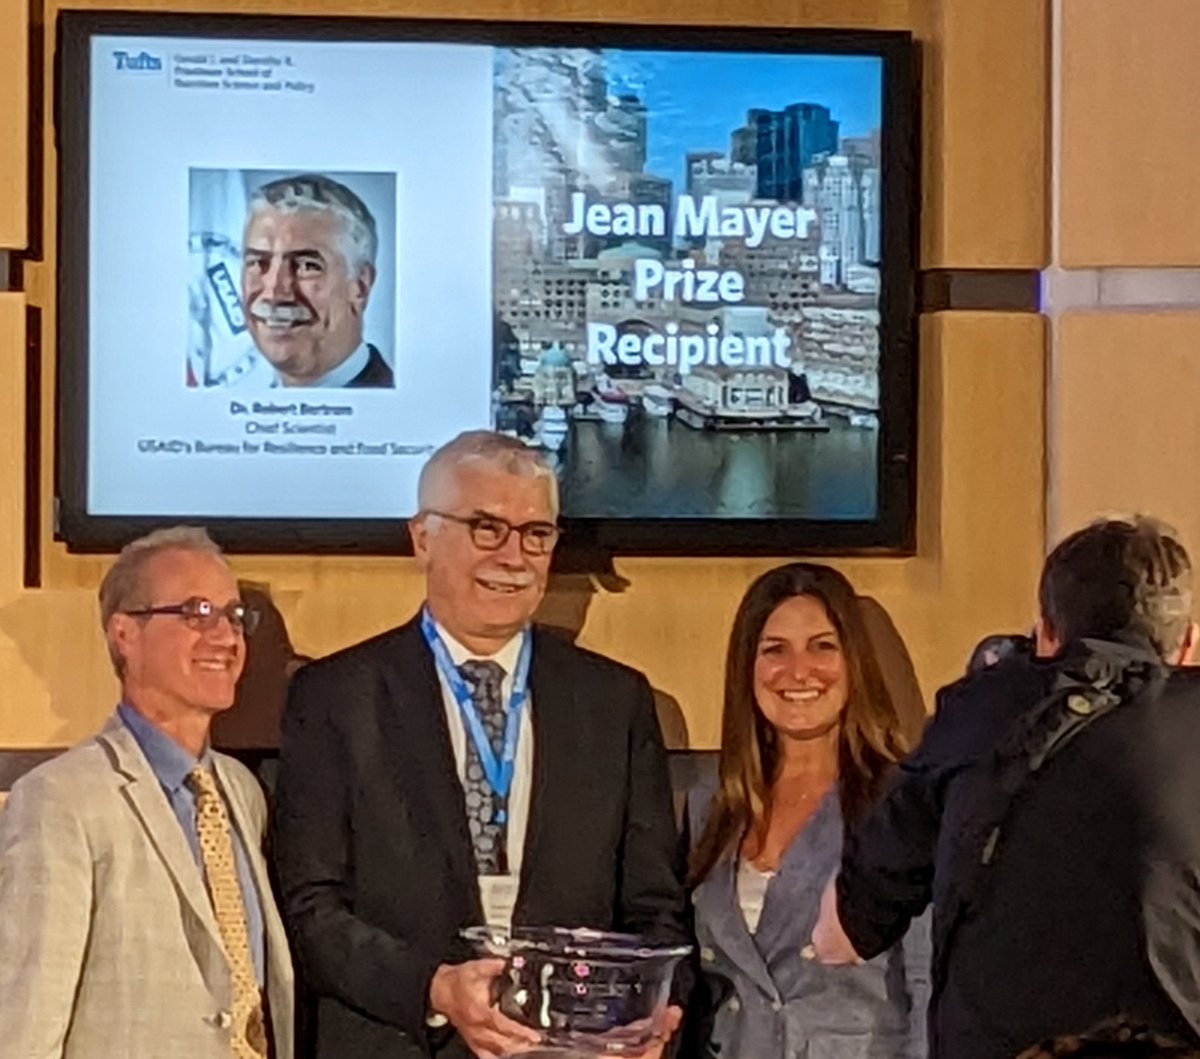 Congratulations to the wonderful Rob Bertram of @usaid @FeedtheFuture on today's #JeanMayerPrize from @TuftsNutrition. Rob is behind so many high-impact programs across Africa & Asia, great to see his work recognized